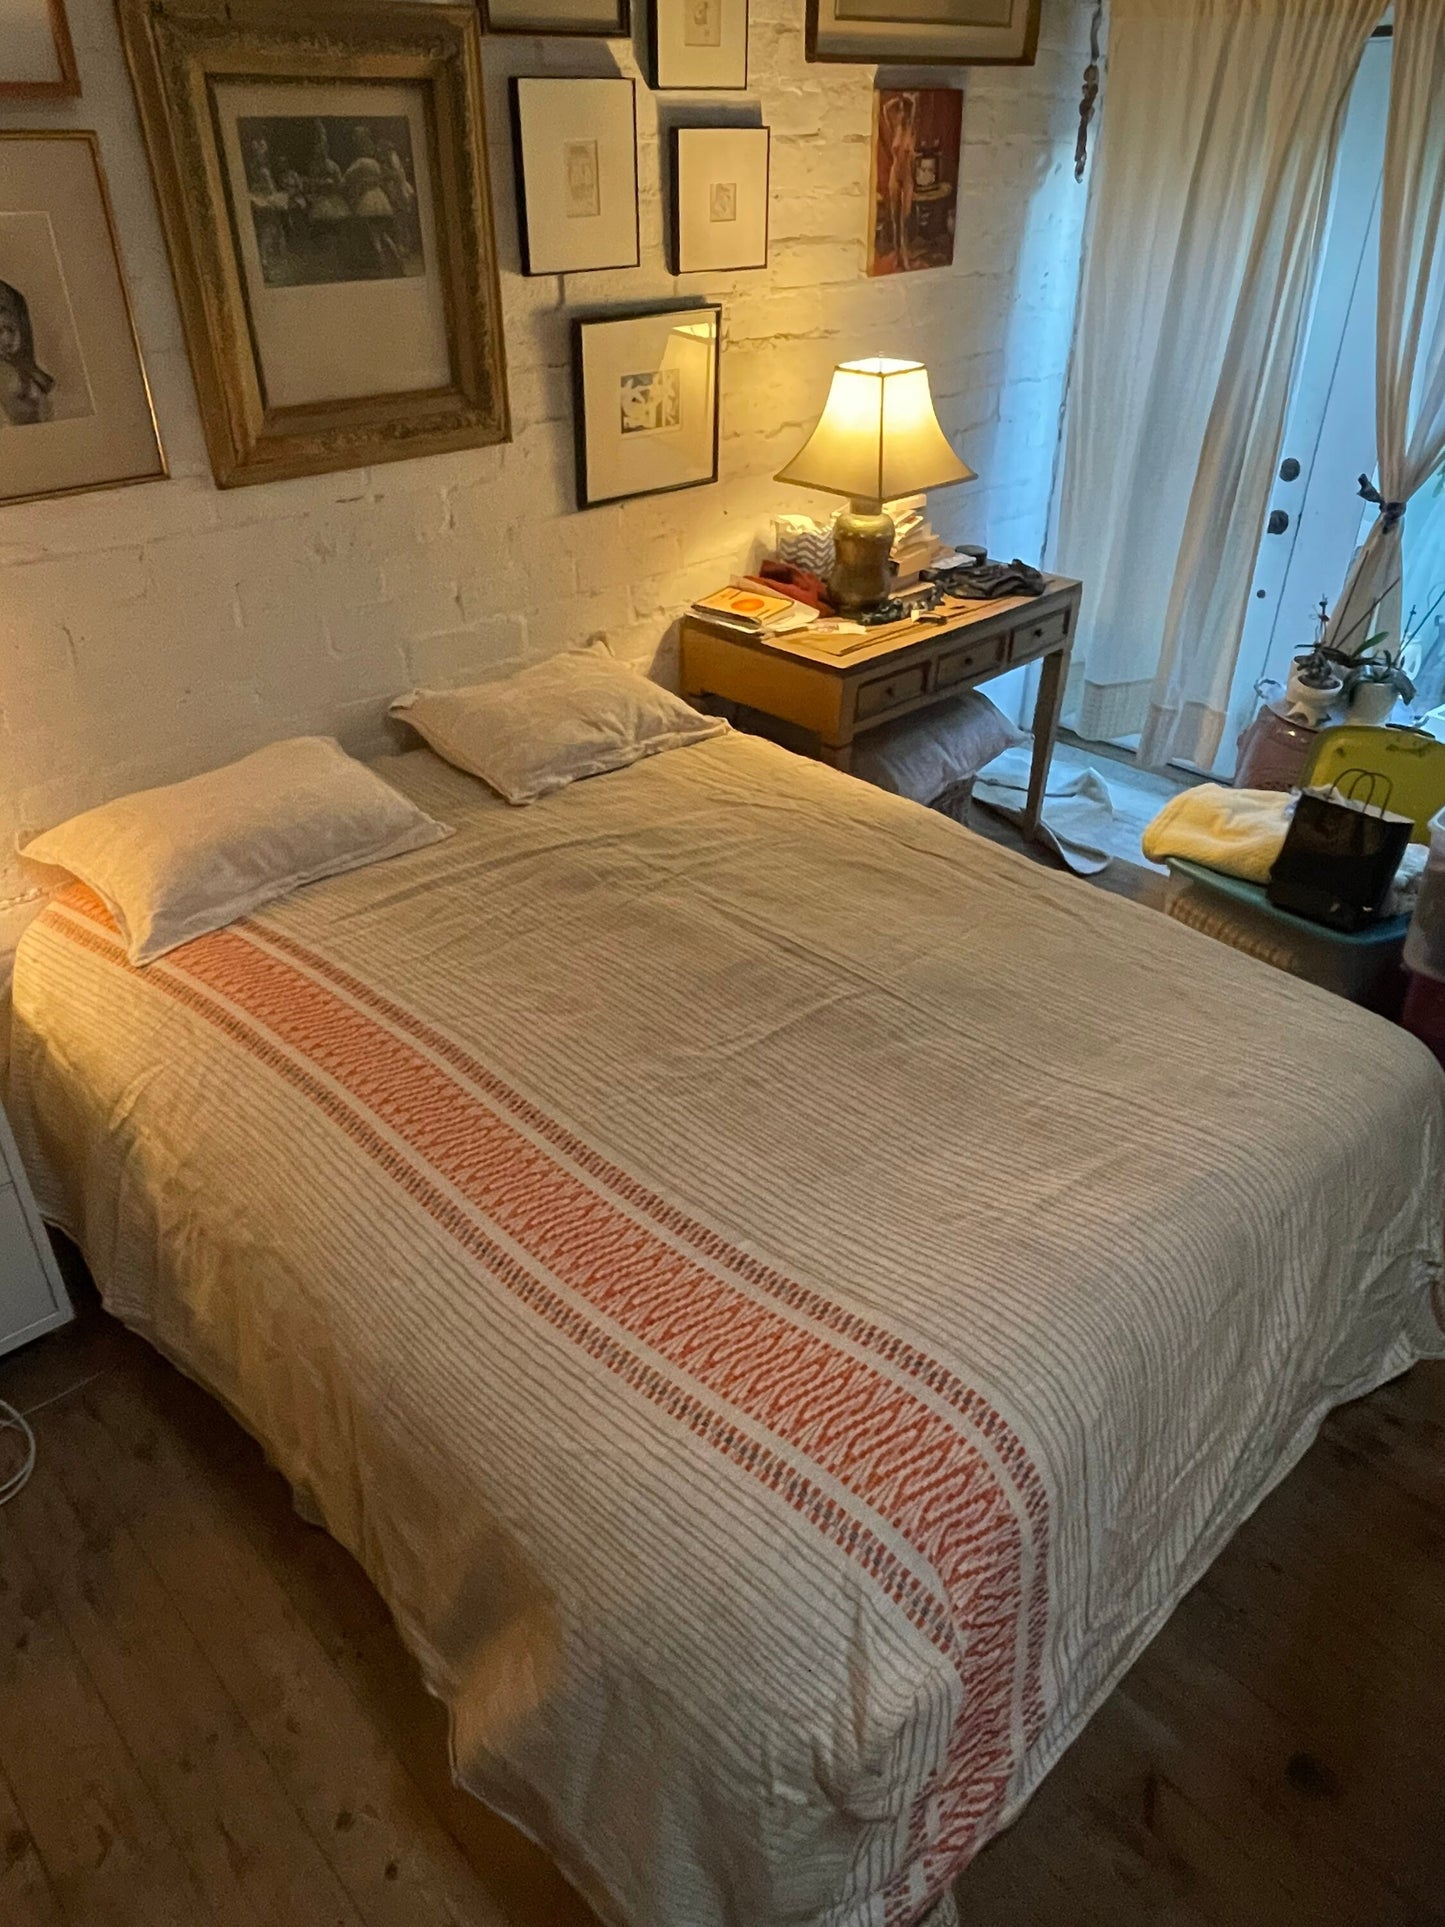 Vintage Handmade Mid Century Bed Spread and Bed Skirt